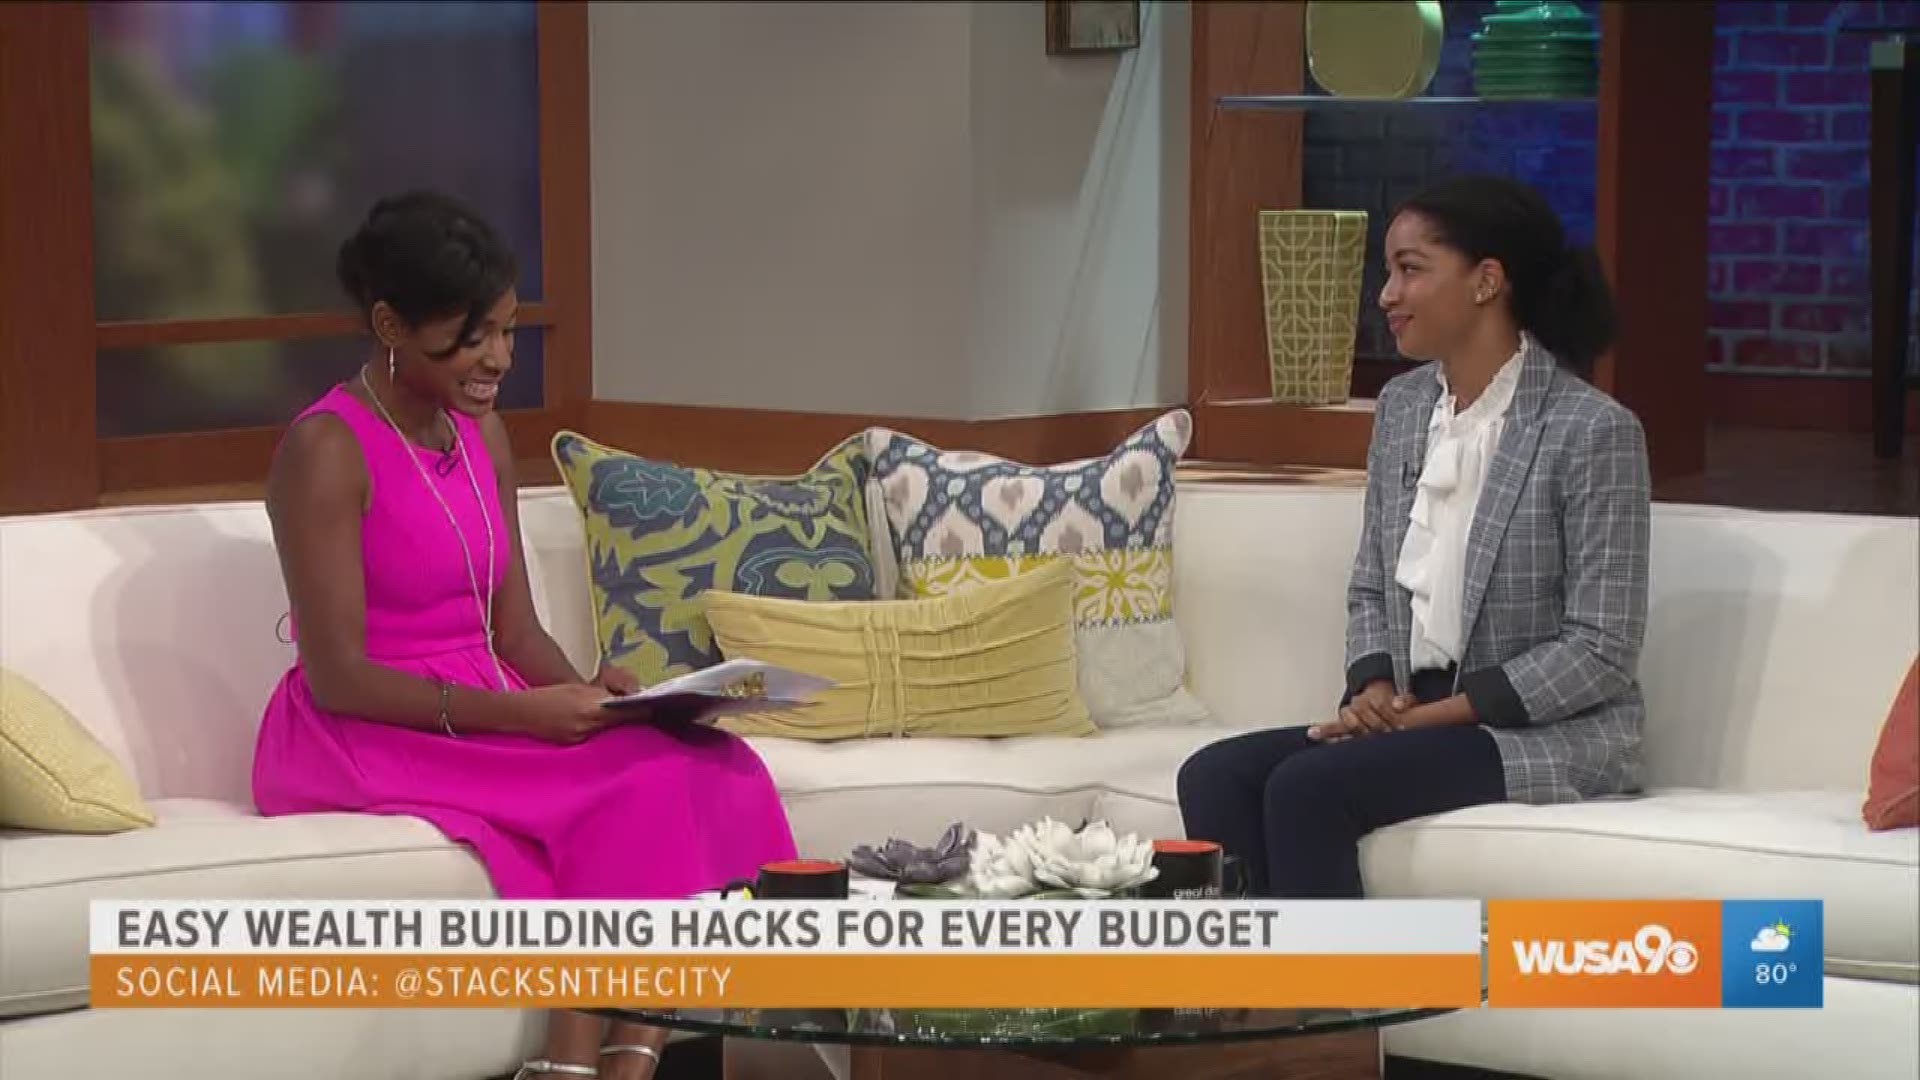 Wealth building is something the average person believes is unattainable. However, Ashley Copeland of Stacks and the City, a media company that focuses on teaching people how to save money, is here to explain how you can wealth build yourself! To obtain more financial advice from Copeland, visit stacksandthecity.co.